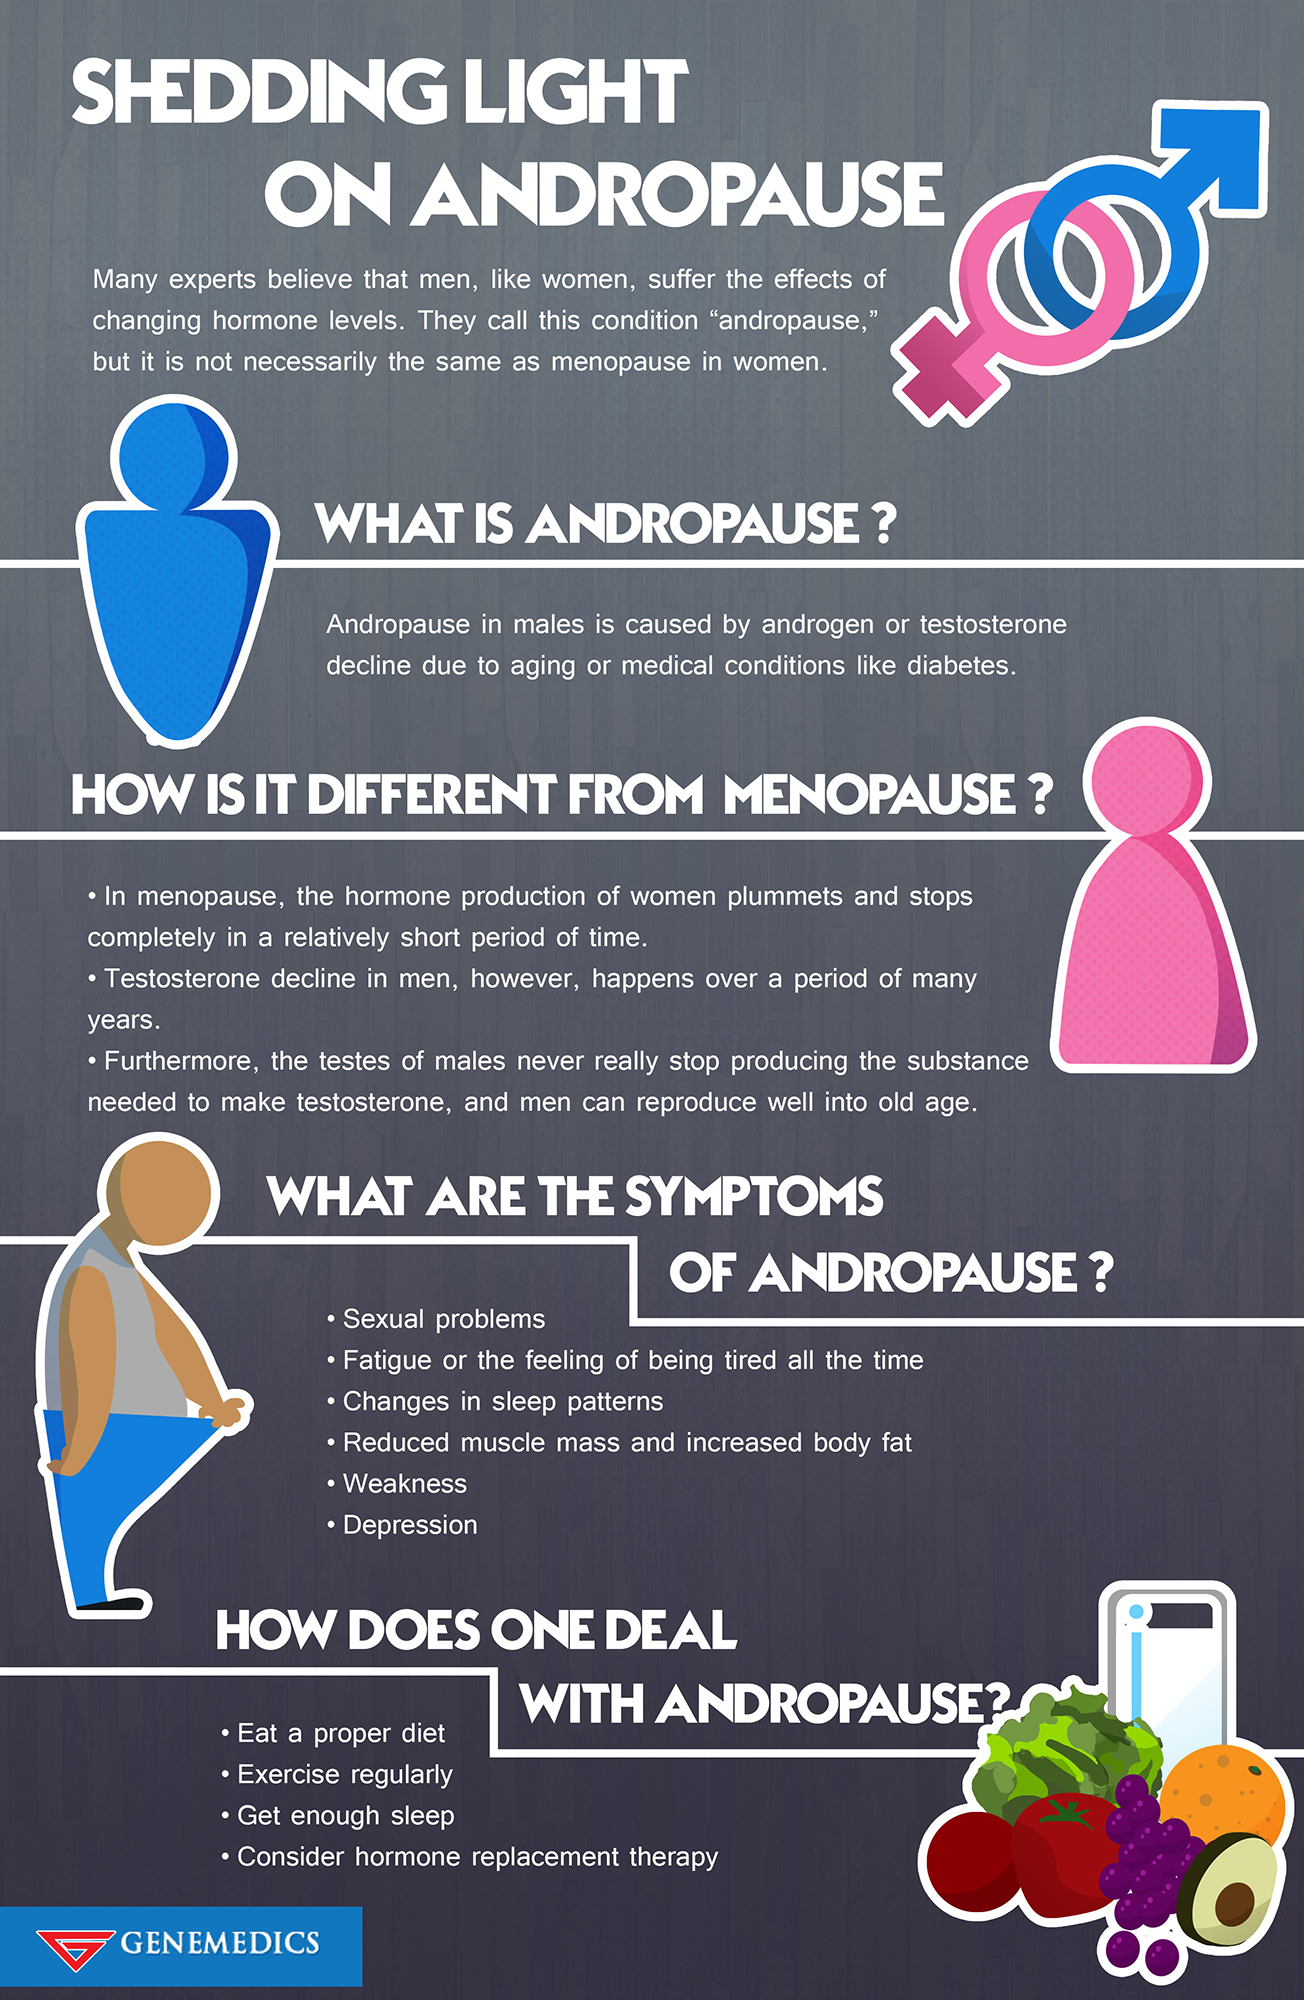 Shedding Light On Andropause Know More About It With An Infographic